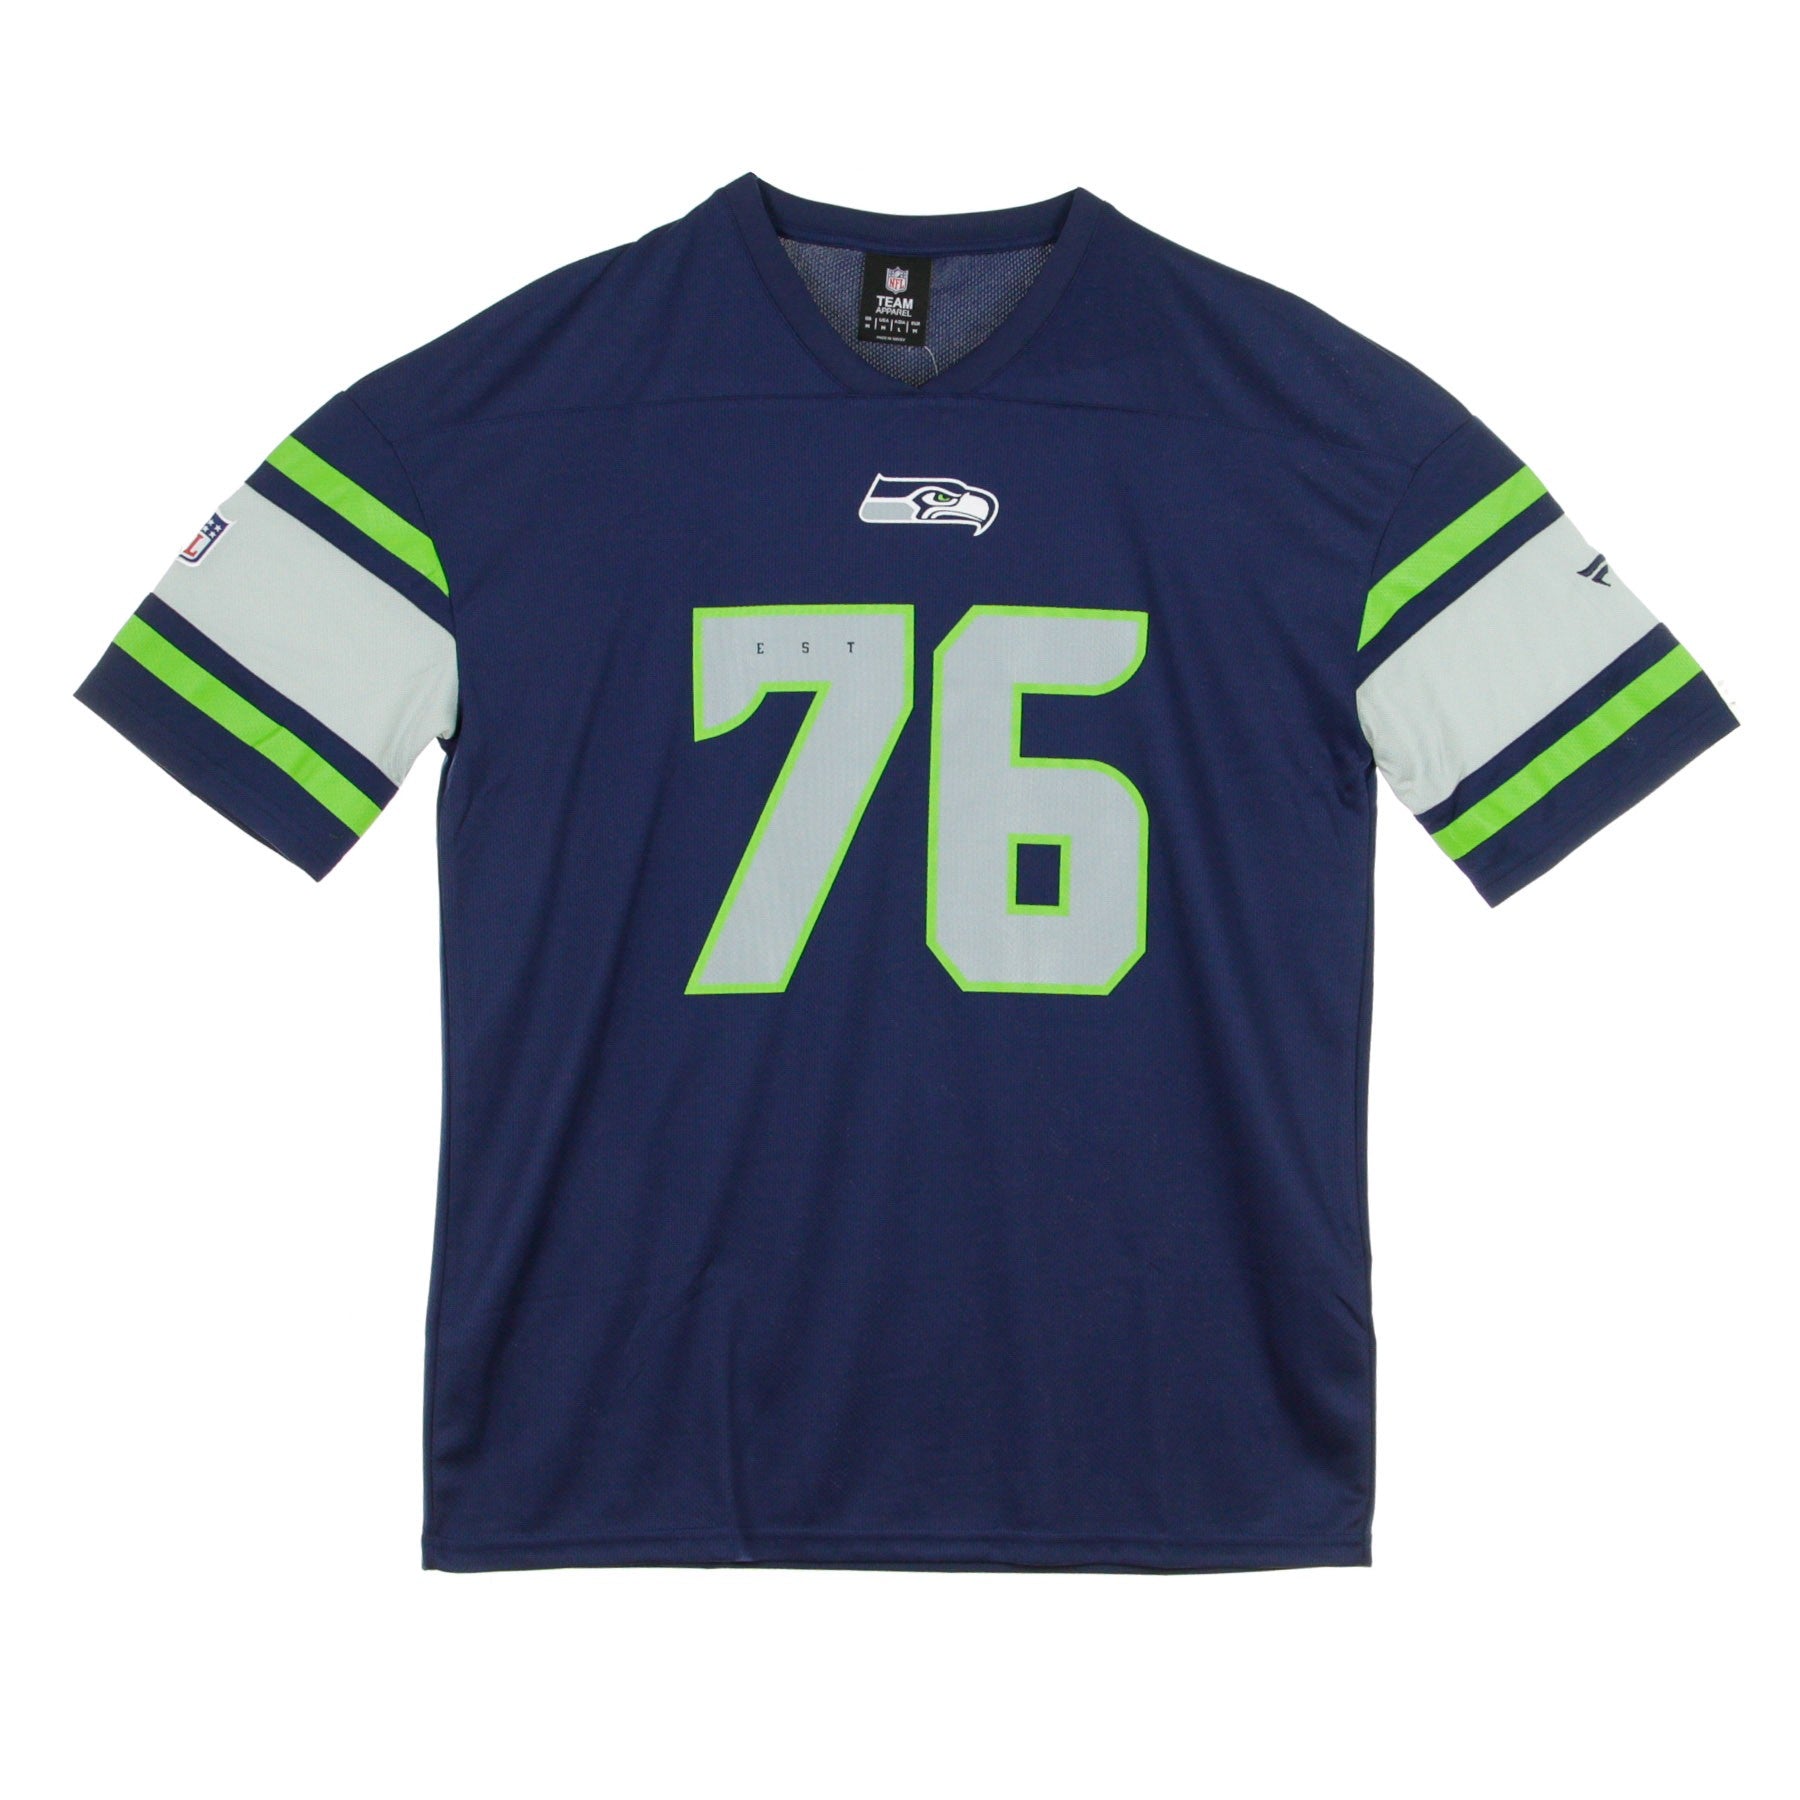 Men's Jersey Nfl Iconic Franchise Poly Mesh Supporters Jersey Seasea Original Team Colors